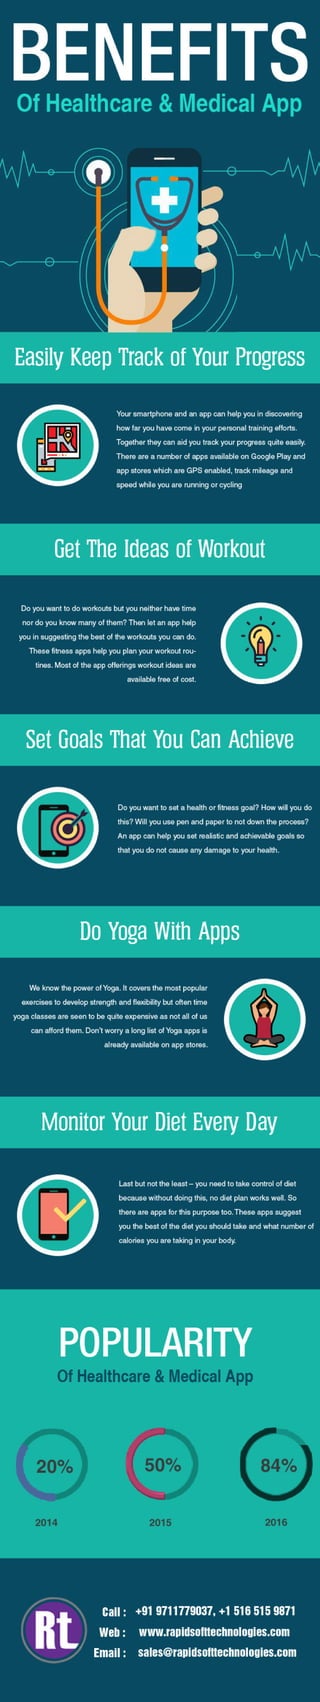 Do You Know the Benefits of Using Healthcare And Fitness Apps